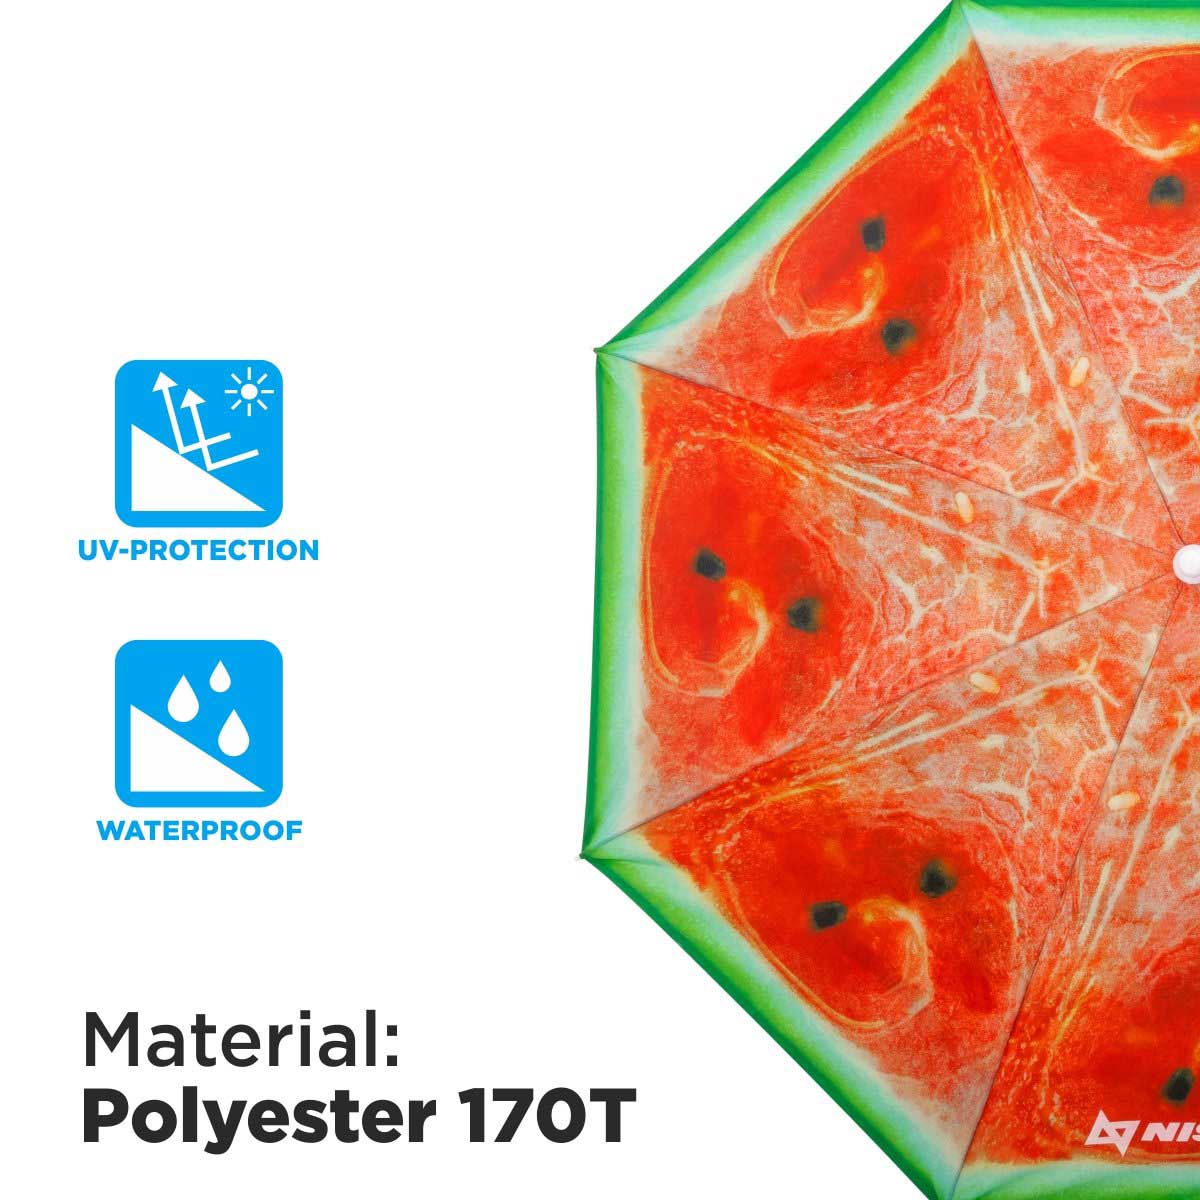 Watermelon Folding Tilting Beach Umbrella is made of waterproof polyester 170T, featuring UV protection